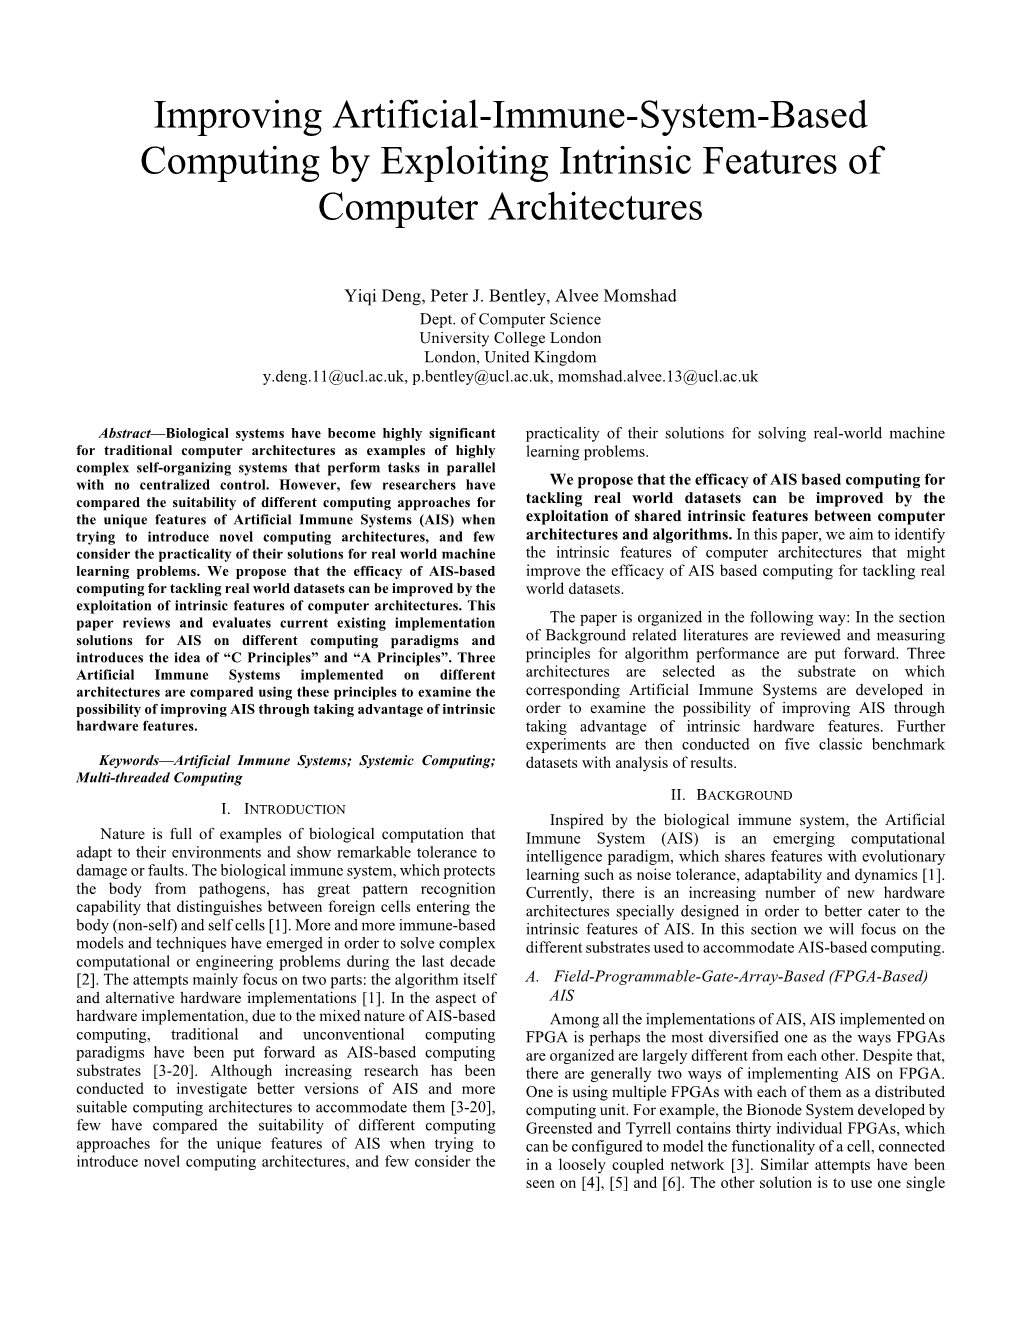 Improving Artificial-Immune-System-Based Computing by Exploiting Intrinsic Features of Computer Architectures